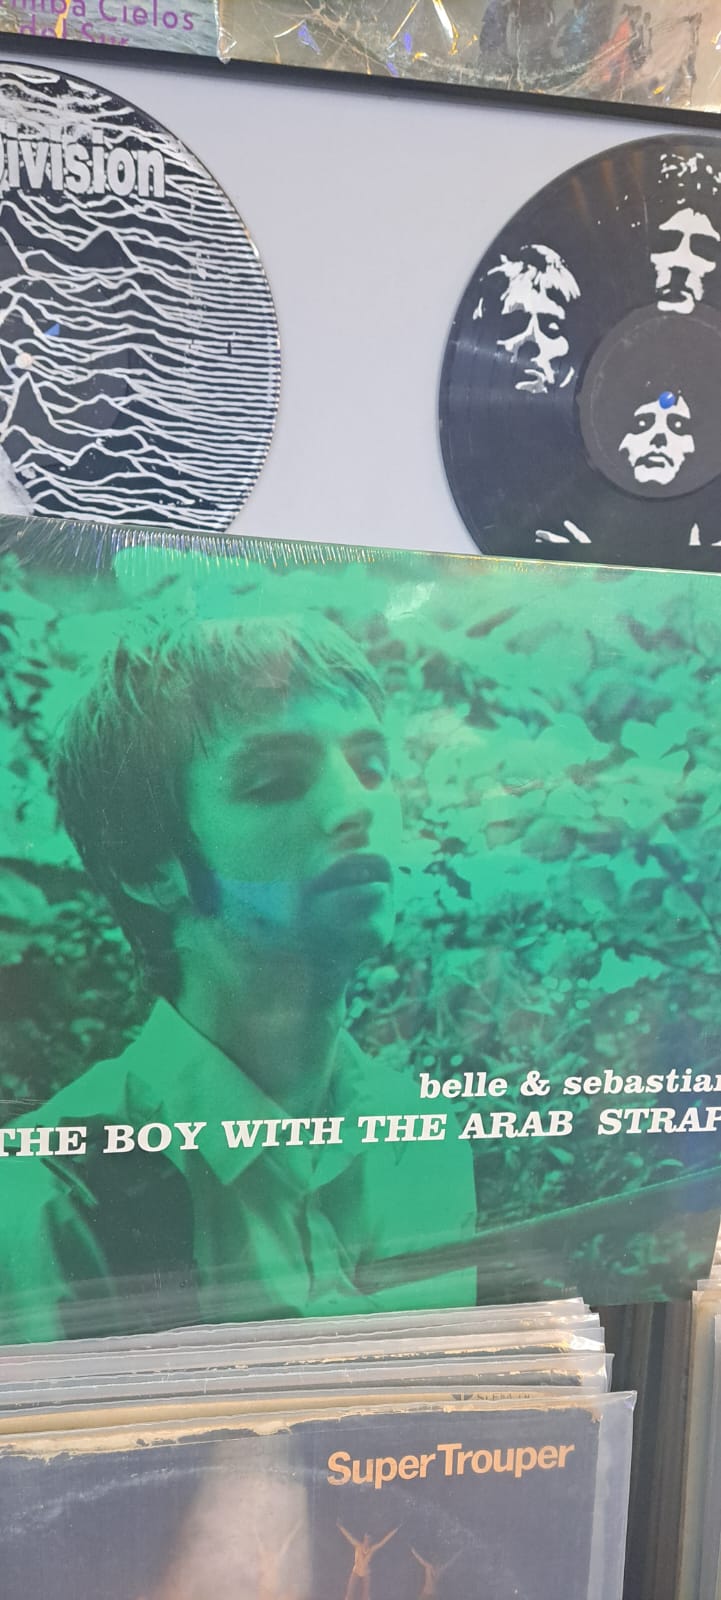 BELLE & SEBASTIAN  THE OY WITH THE ARAB STRAP